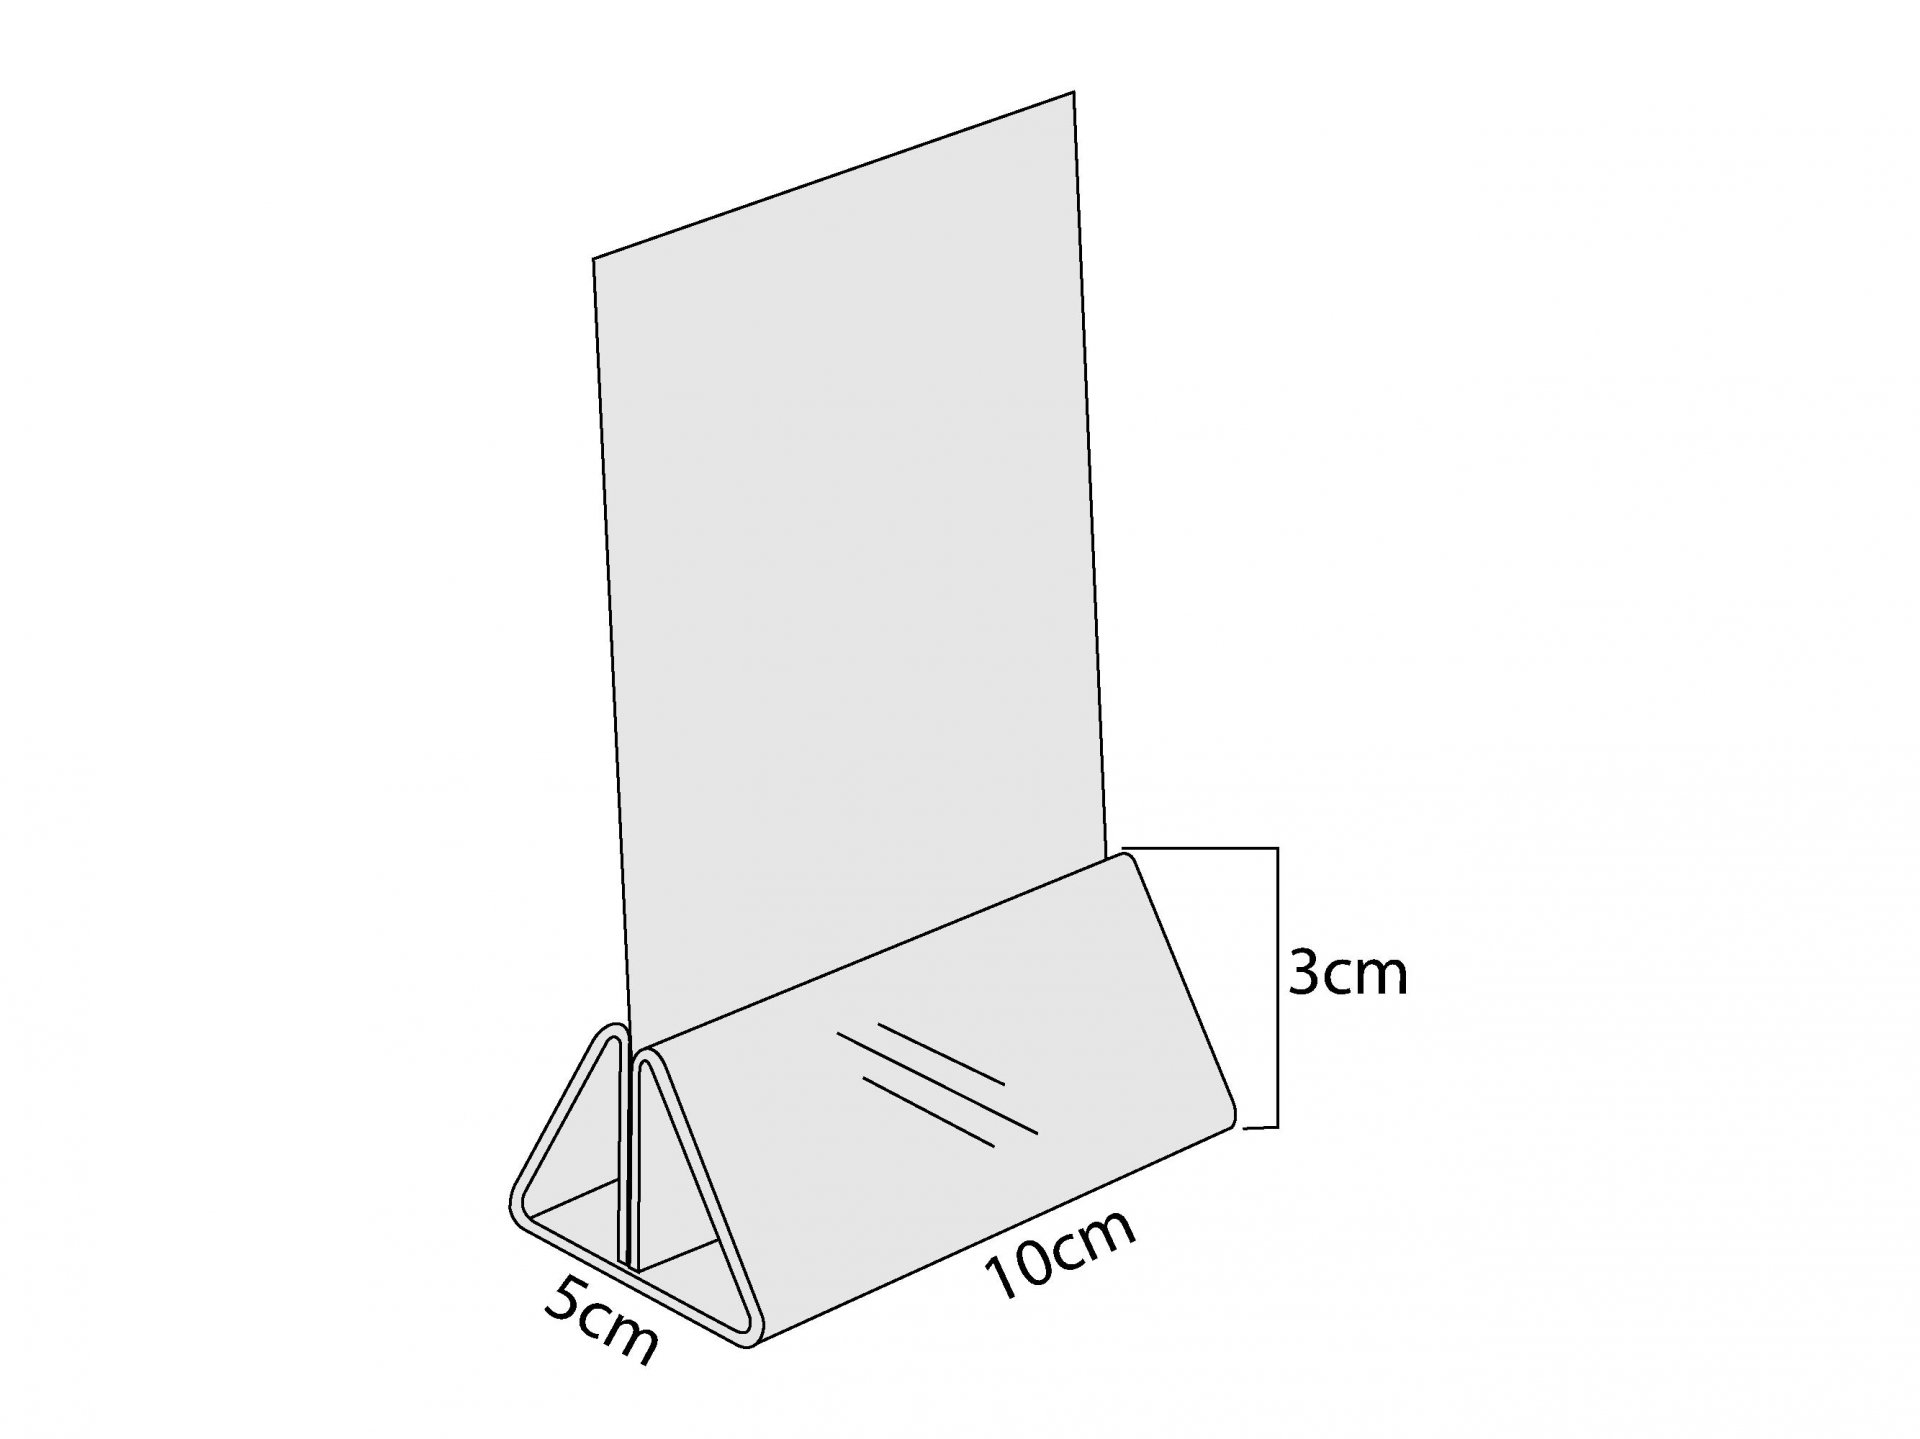 T-Stand base 10 cm wide. Fold 